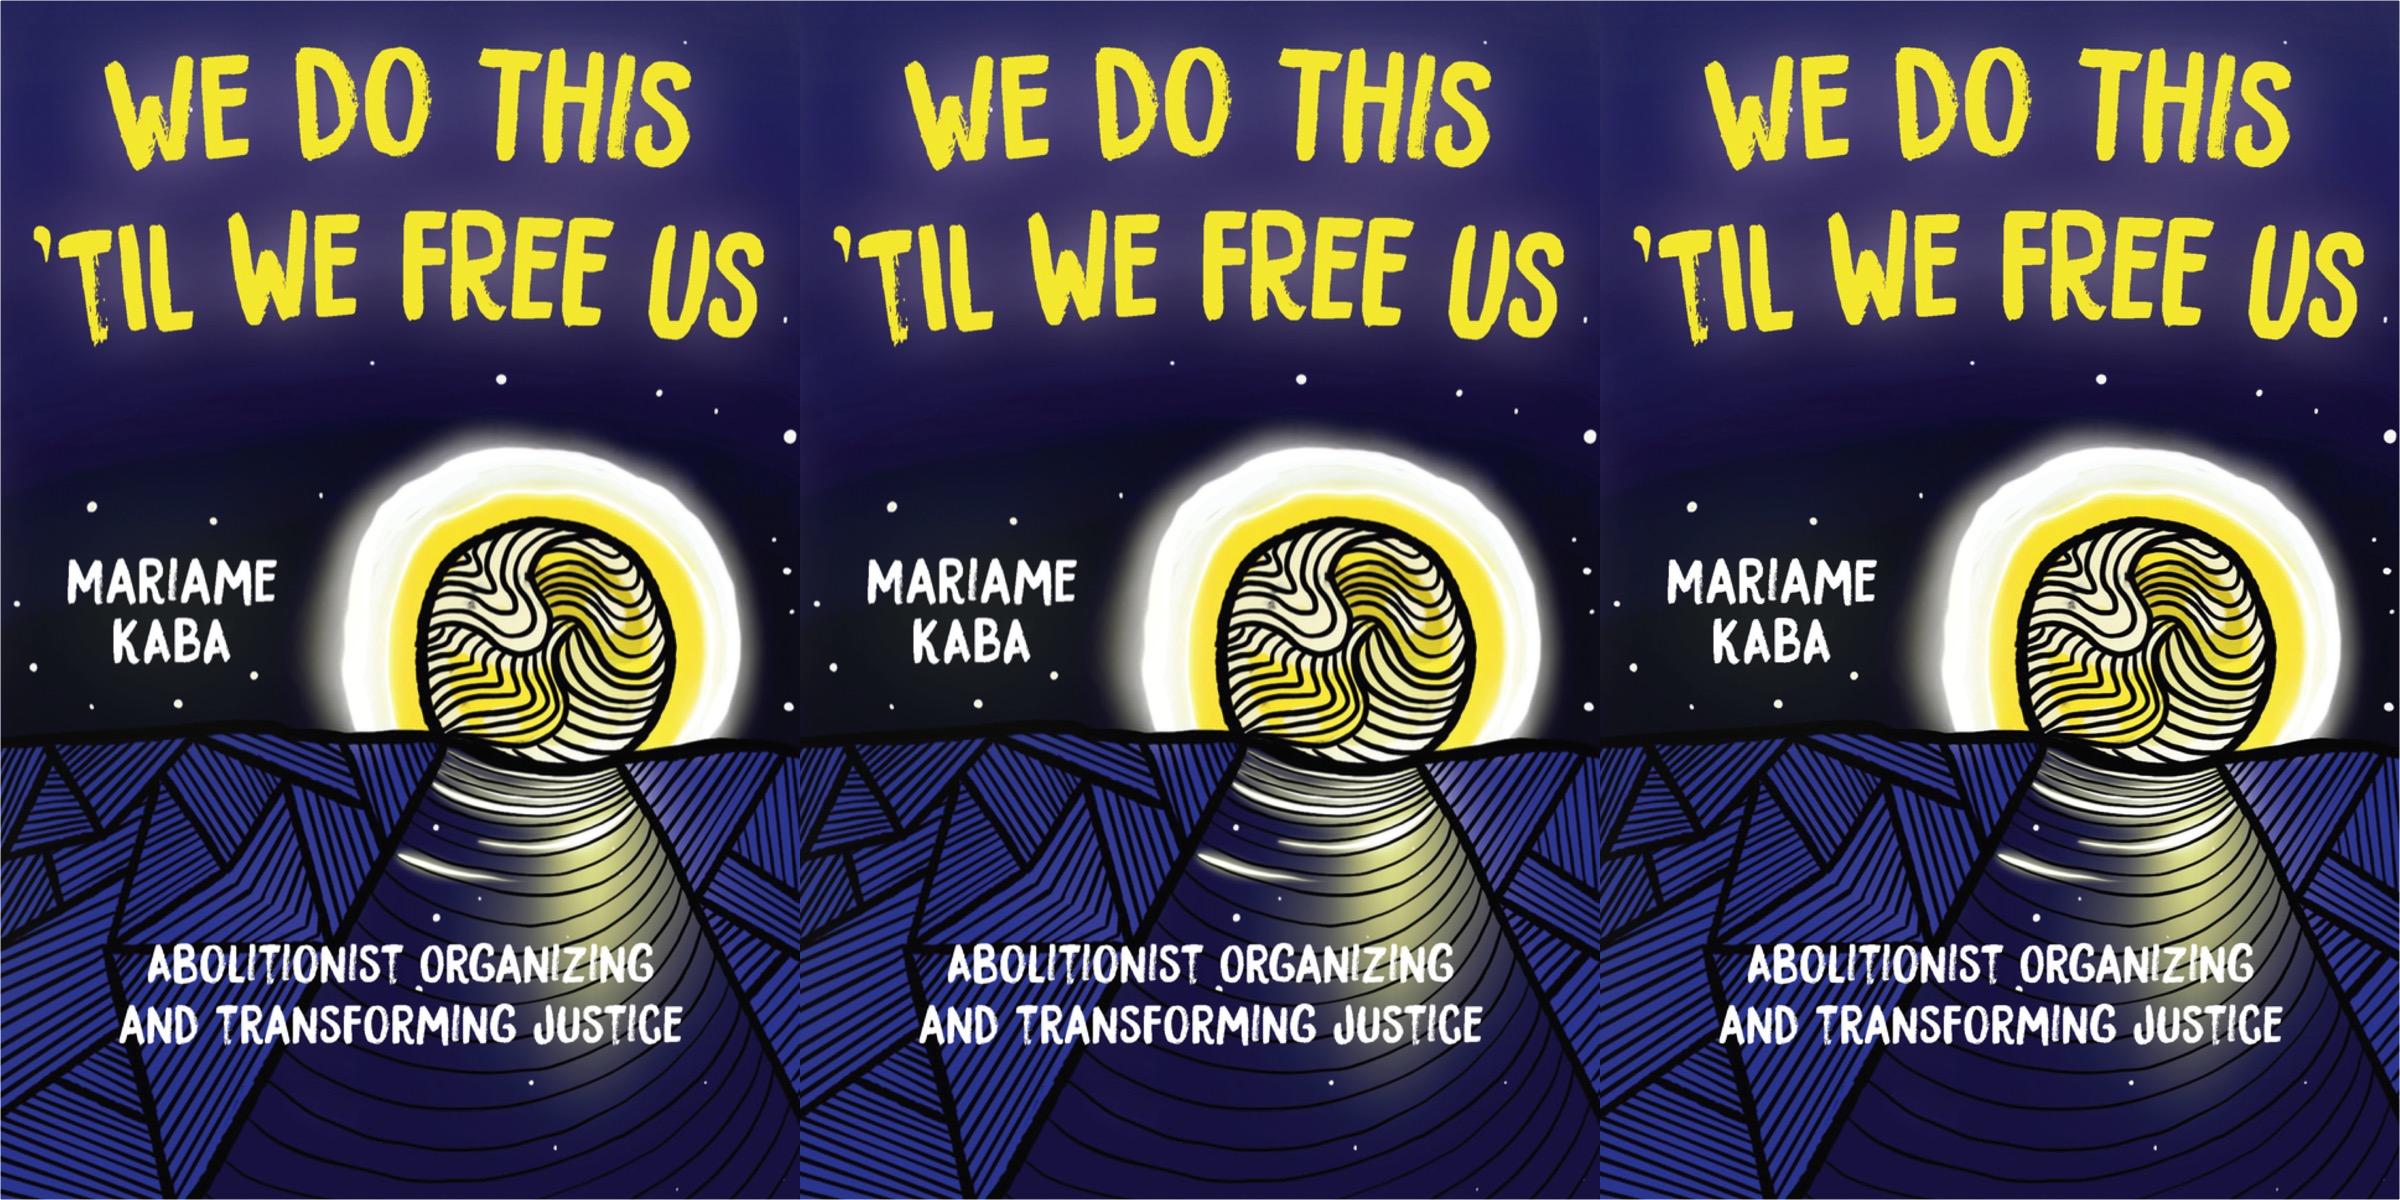 Three repeating images of the cover of Mariame Kaba's We Do This Til We Free Us